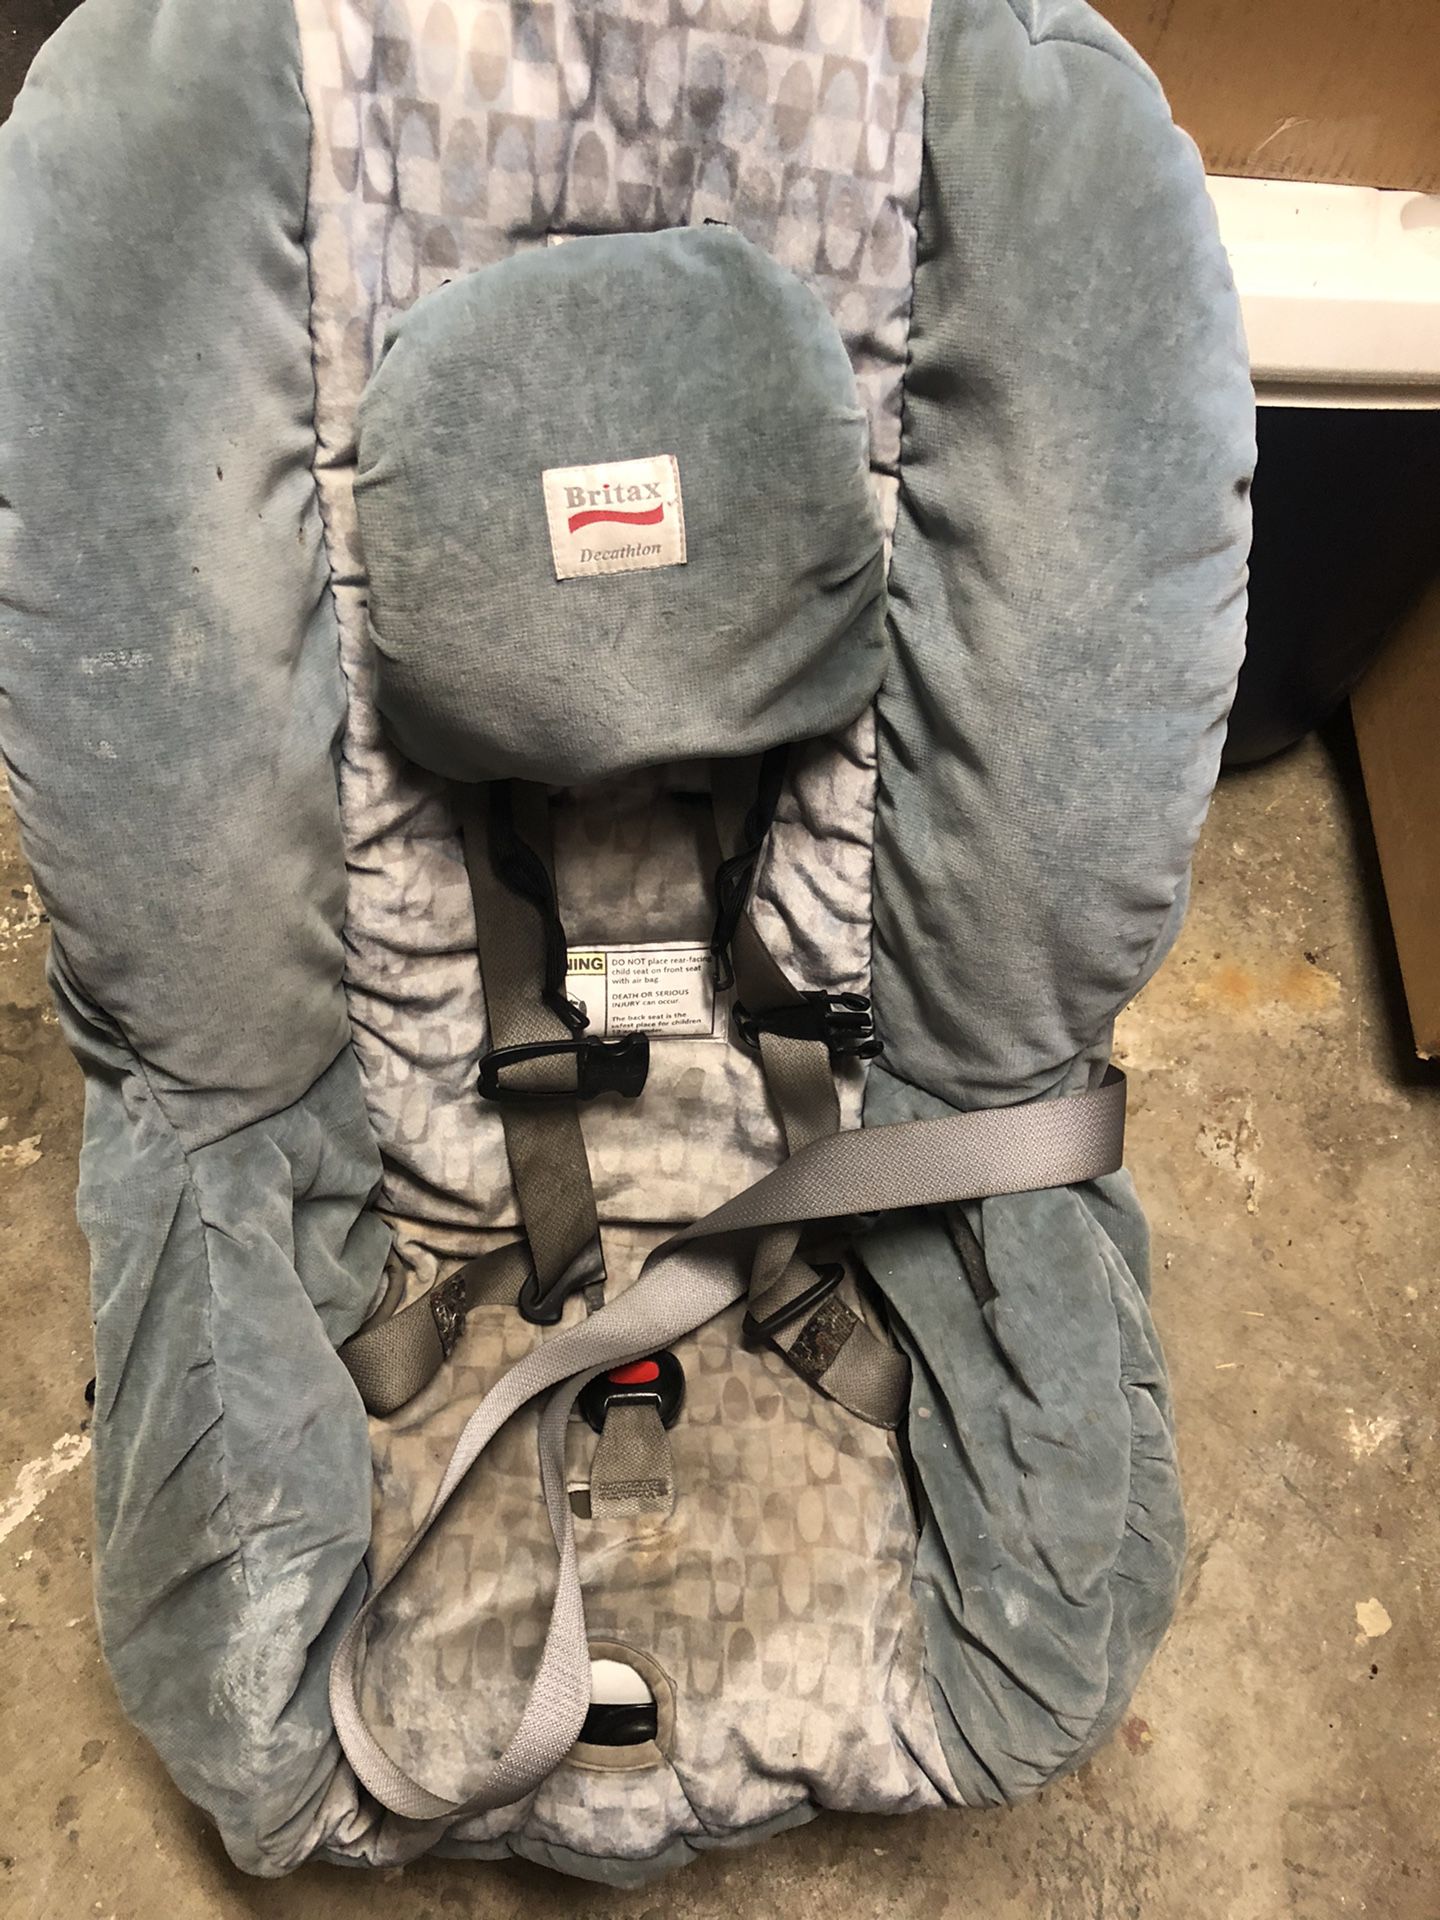 Car seat, frames, and more